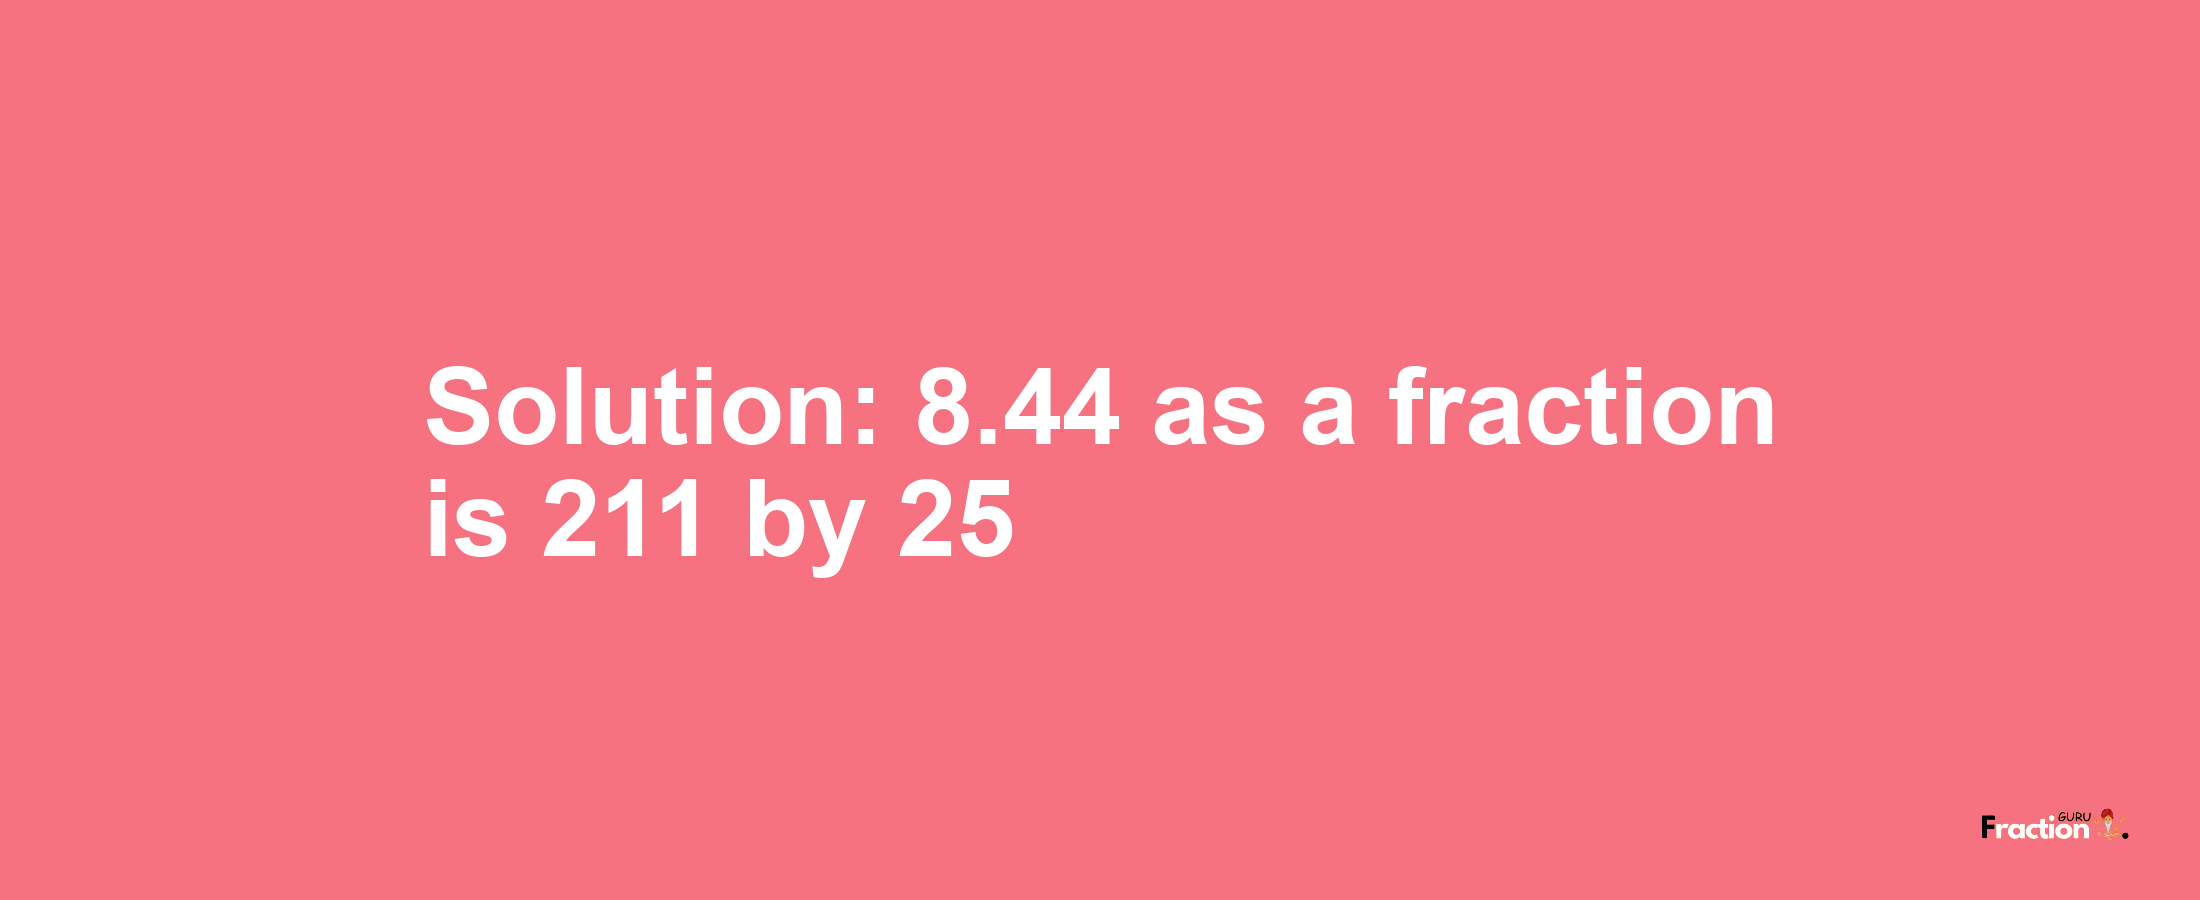 Solution:8.44 as a fraction is 211/25